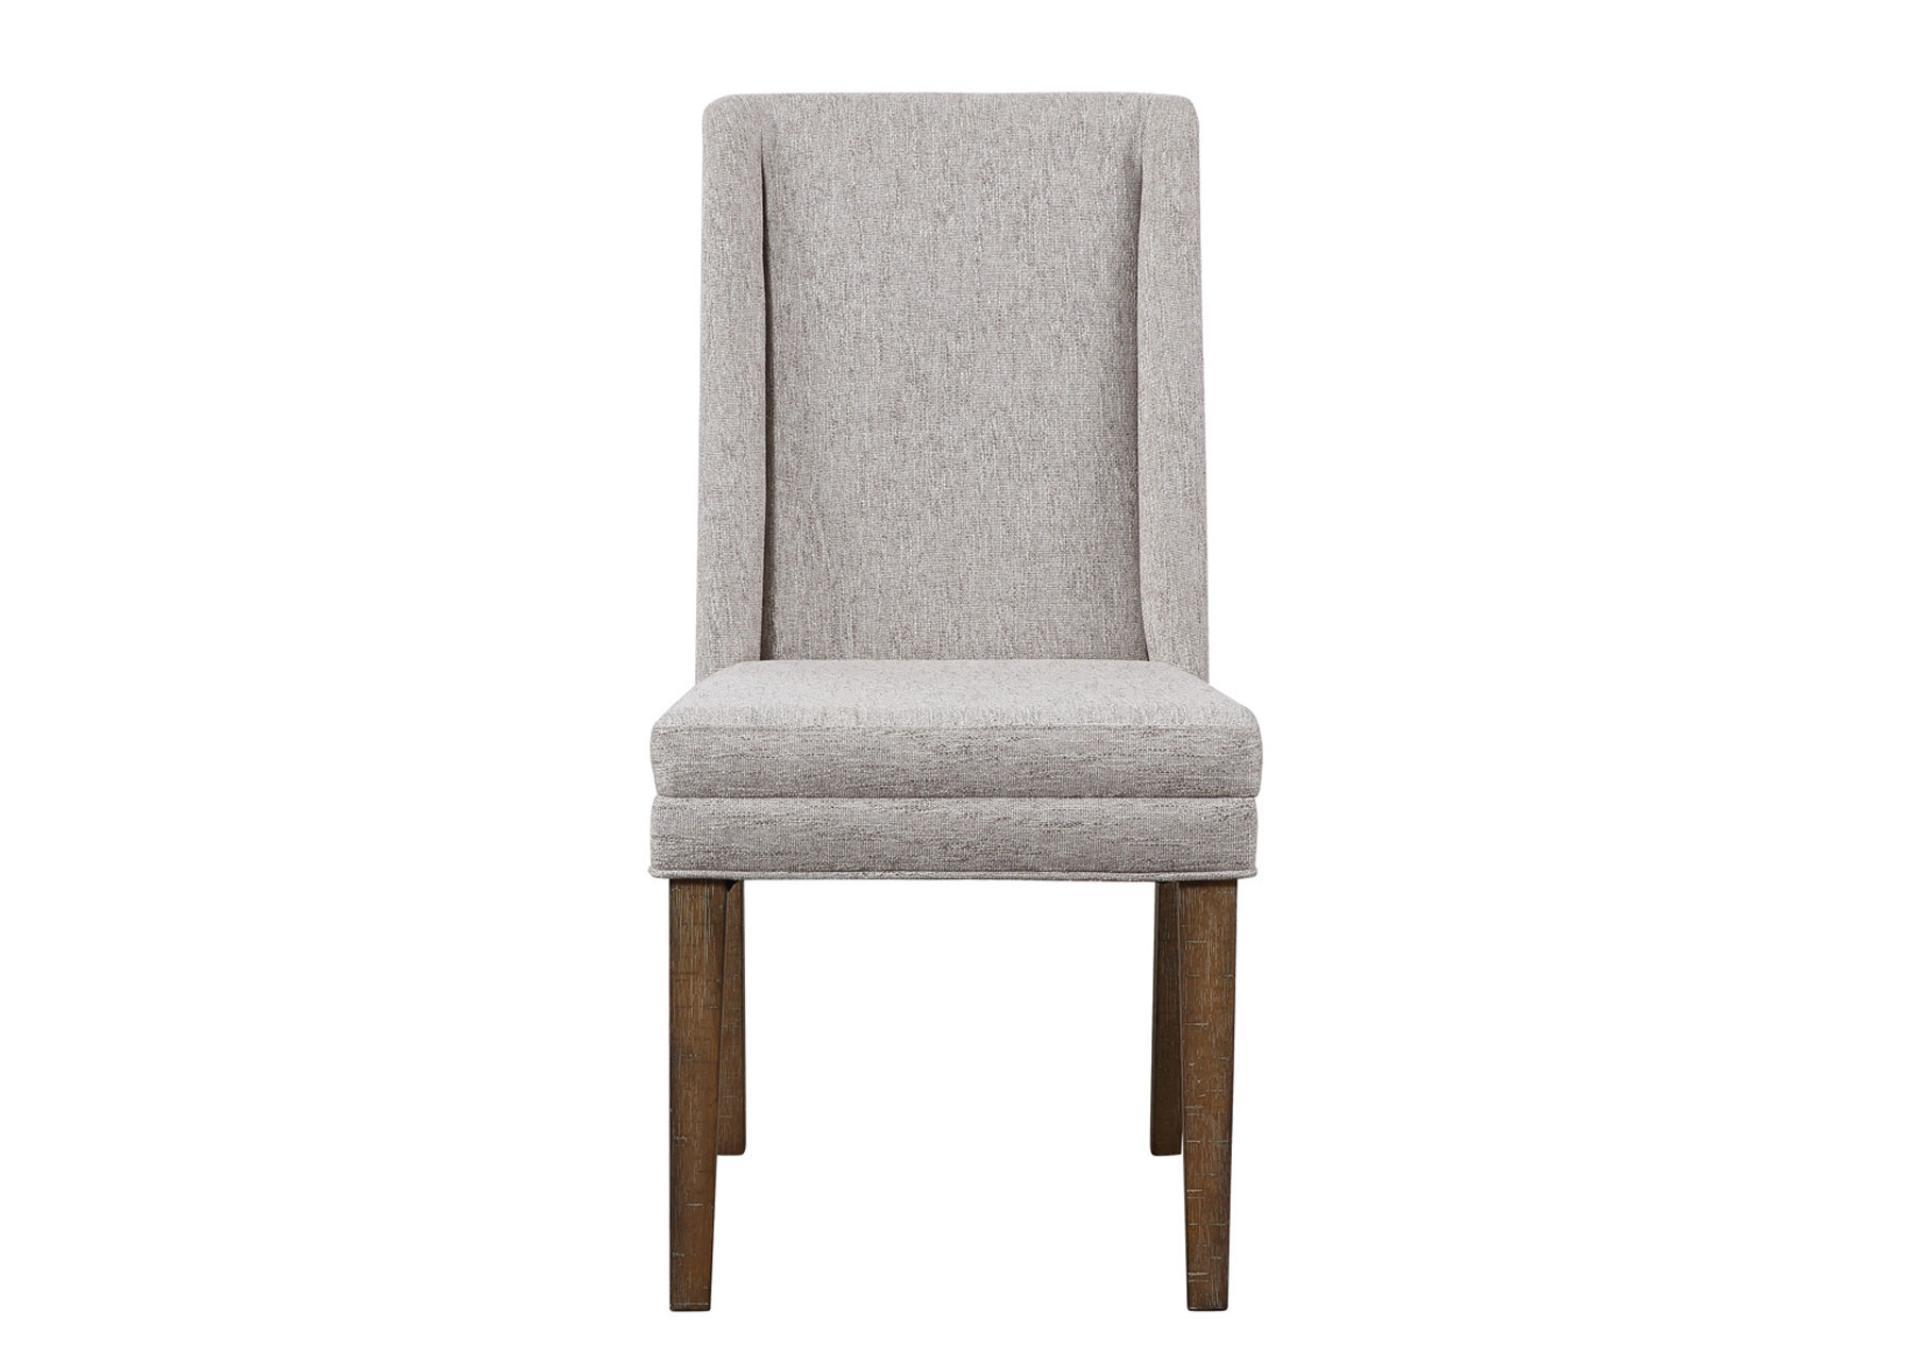 RIVERDALE UPHOLSTERED SIDE CHAIR,STEVE SILVER COMPANY